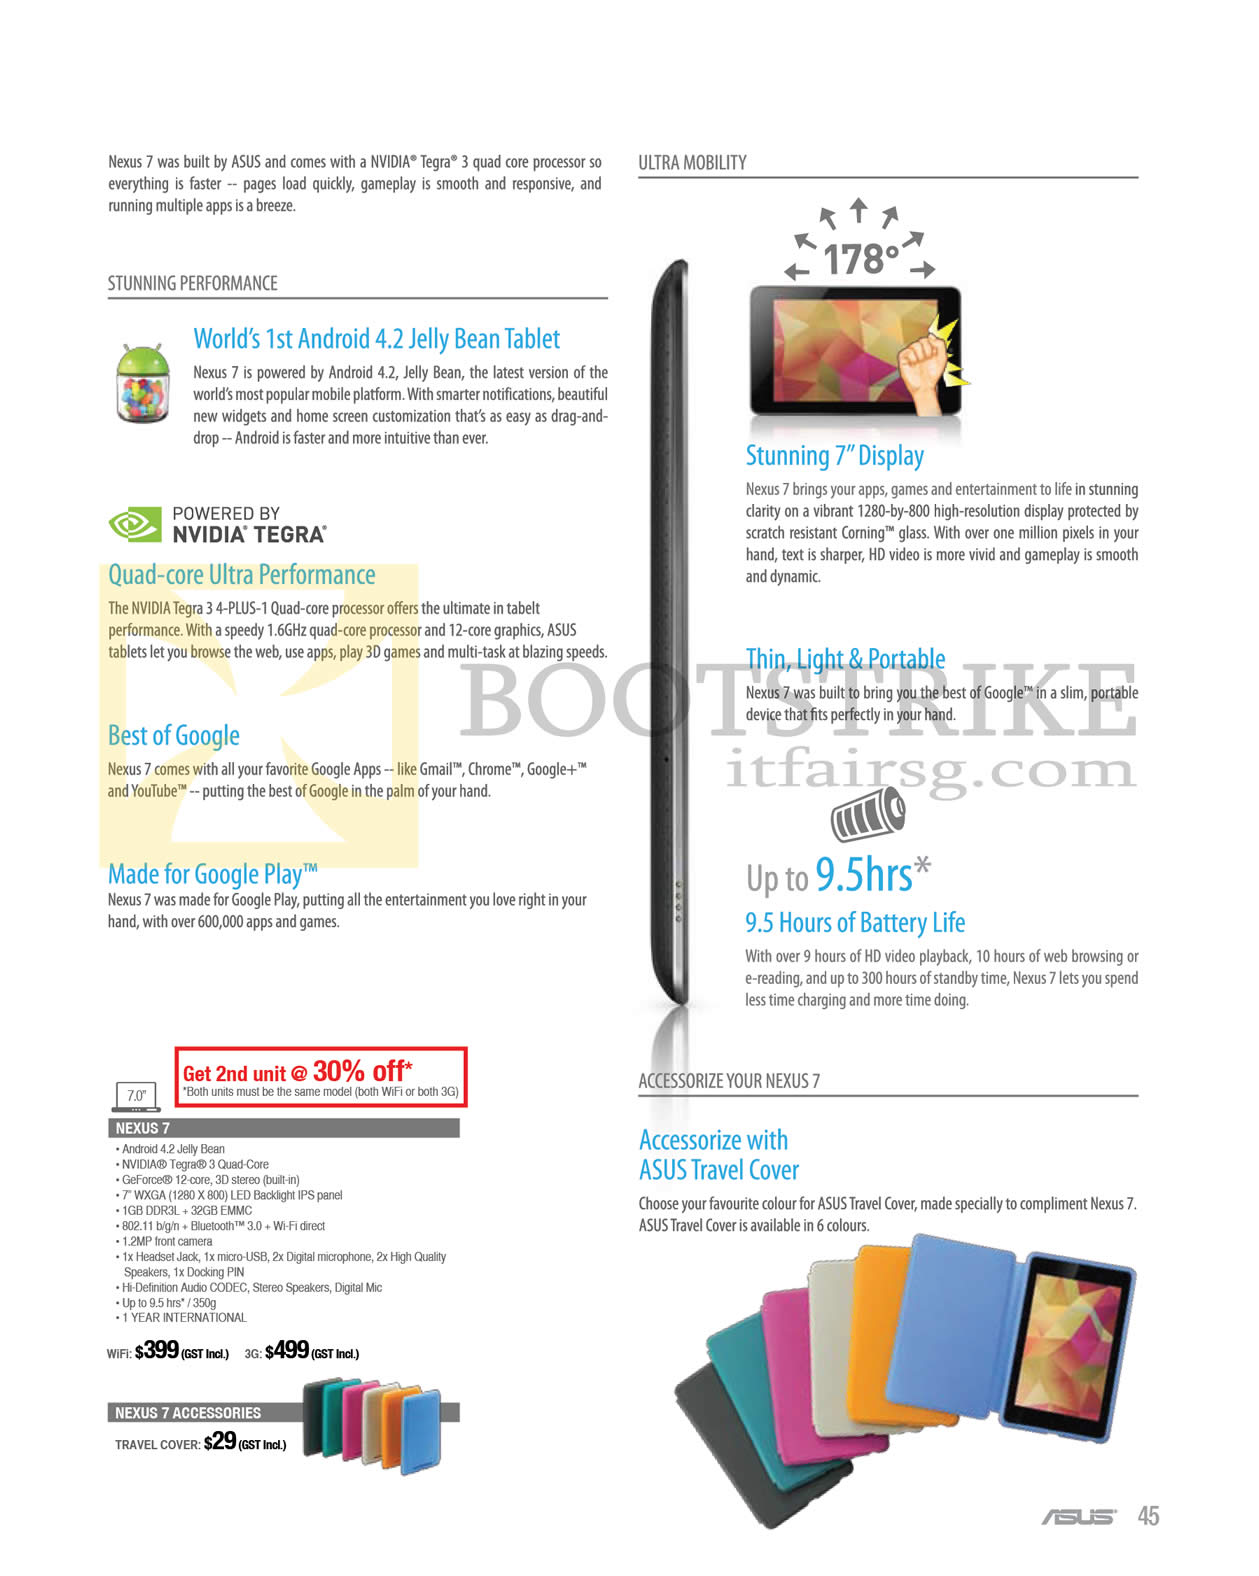 PC SHOW 2013 price list image brochure of ASUS Tablets Nexus 7, Features, Accessories